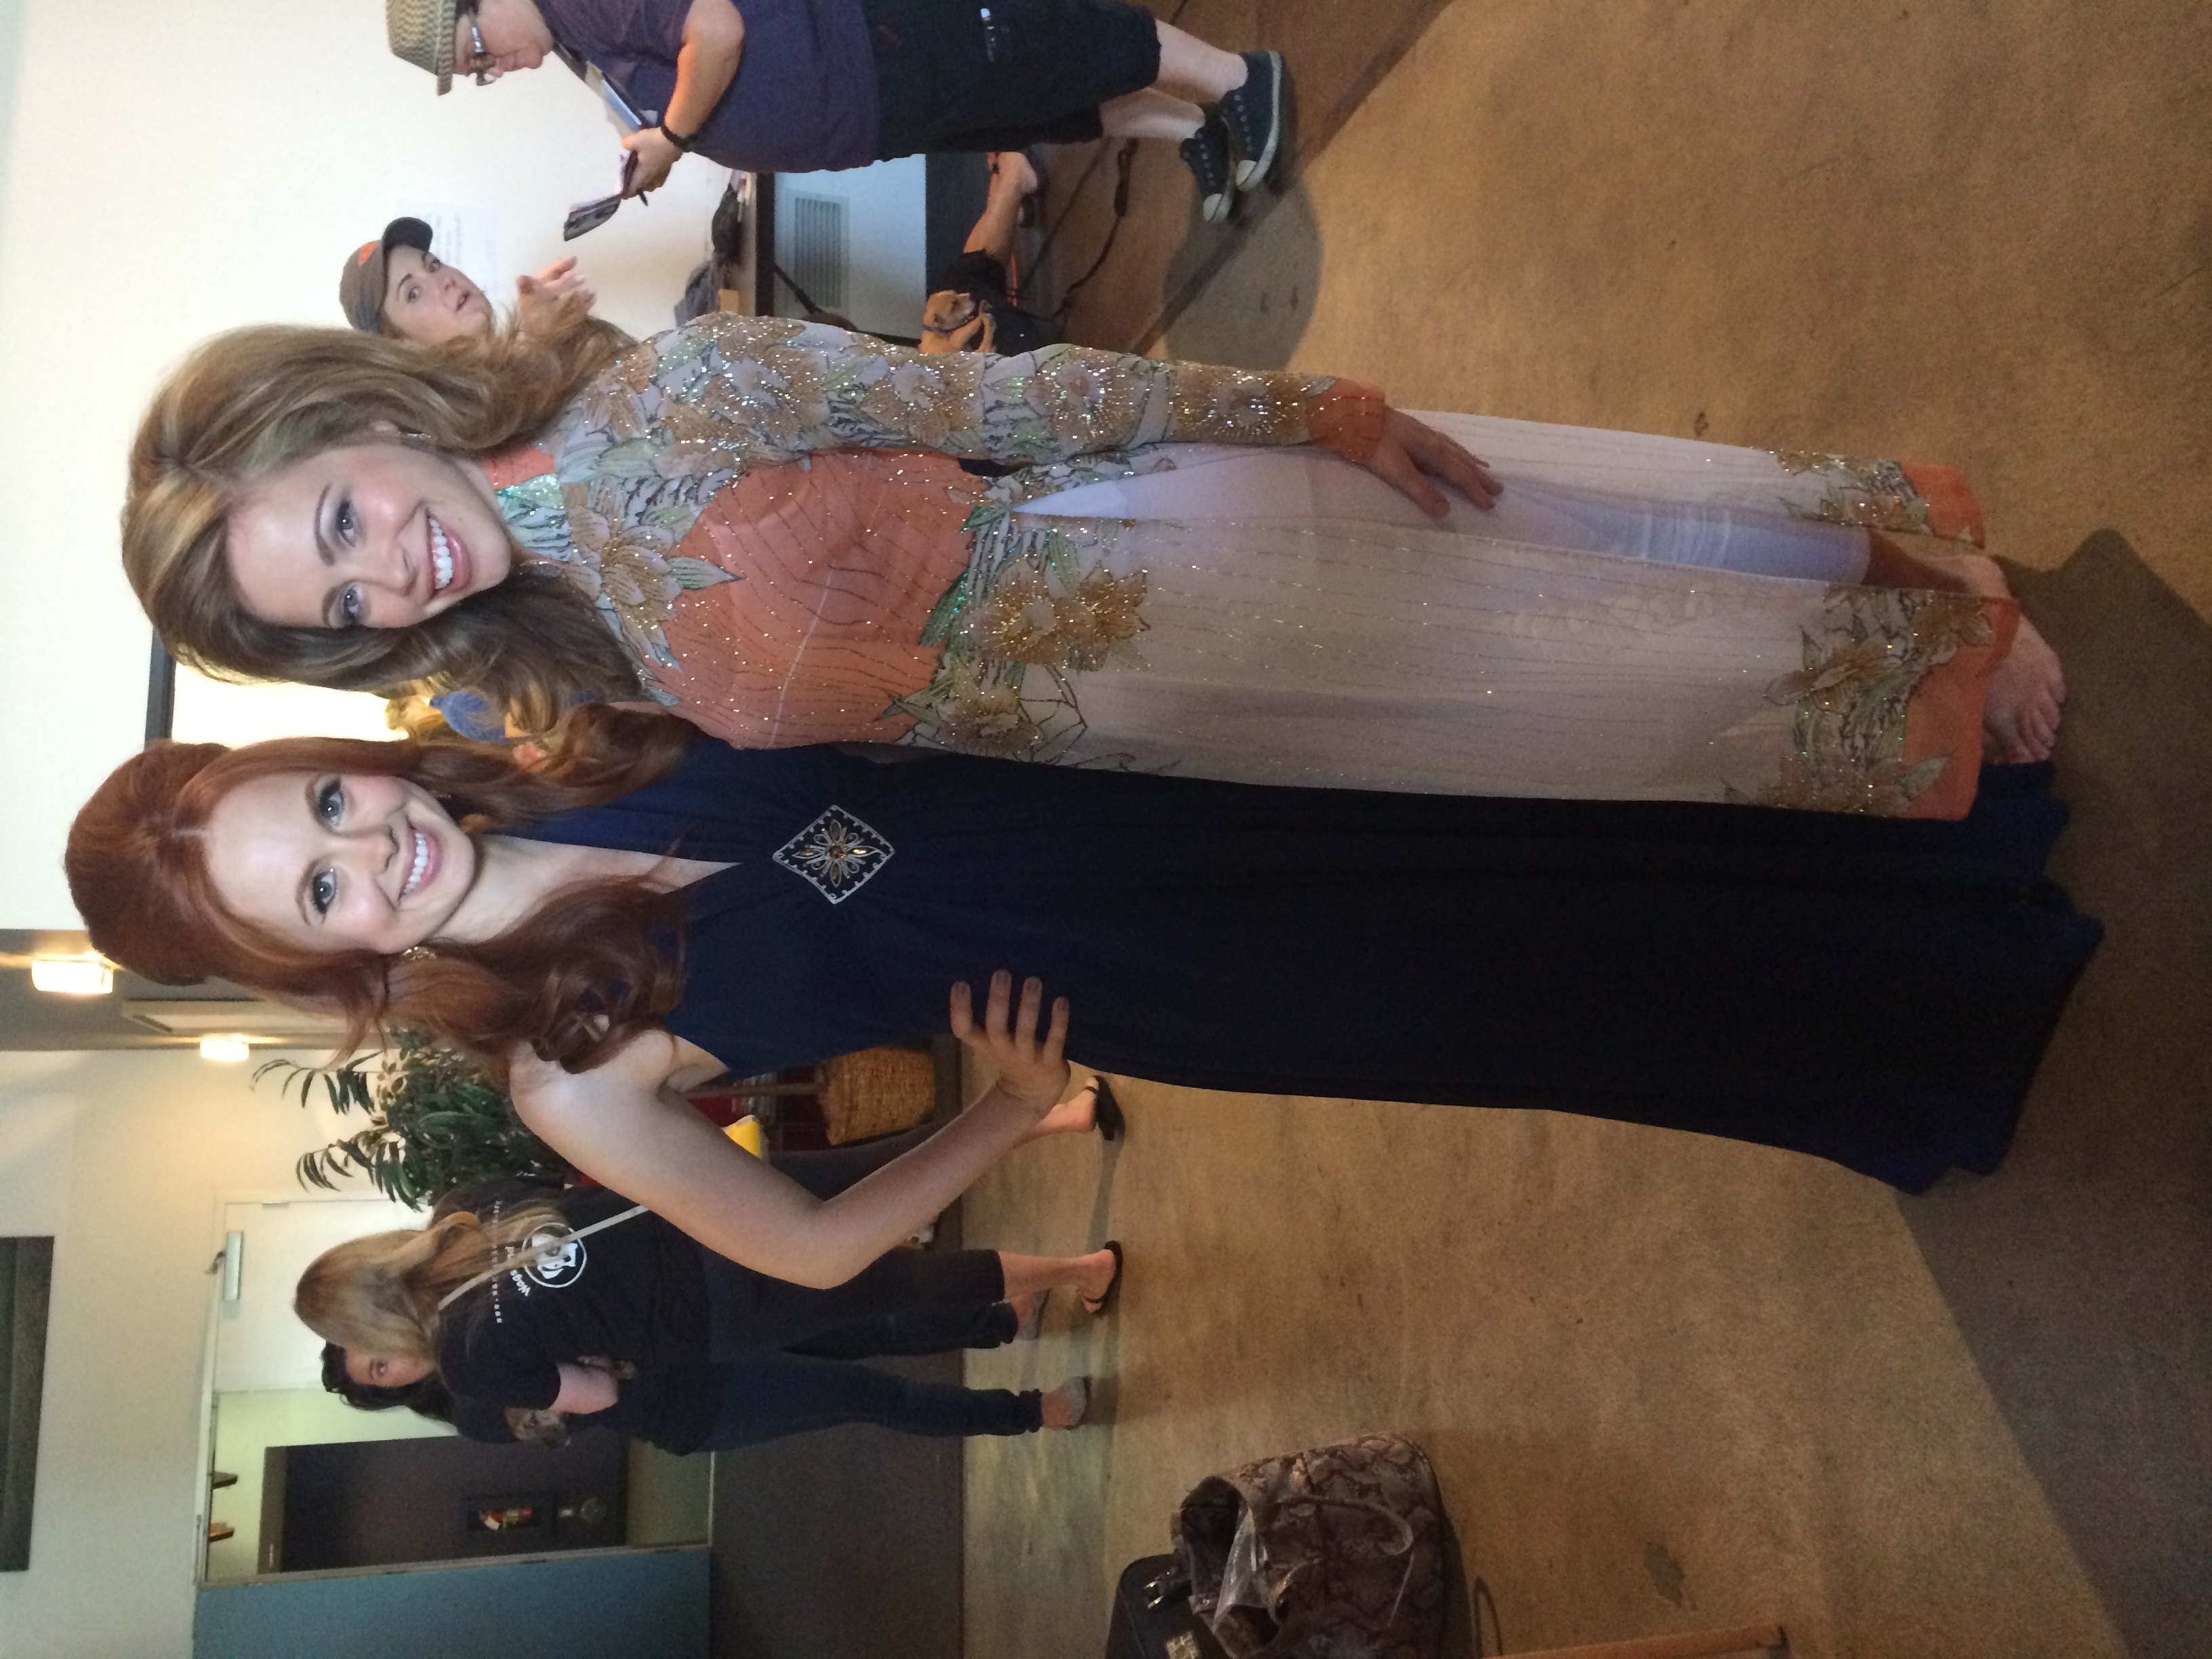 Galadriel Stineman and Skyler behind the scenes at Wags and Walks photoshoot